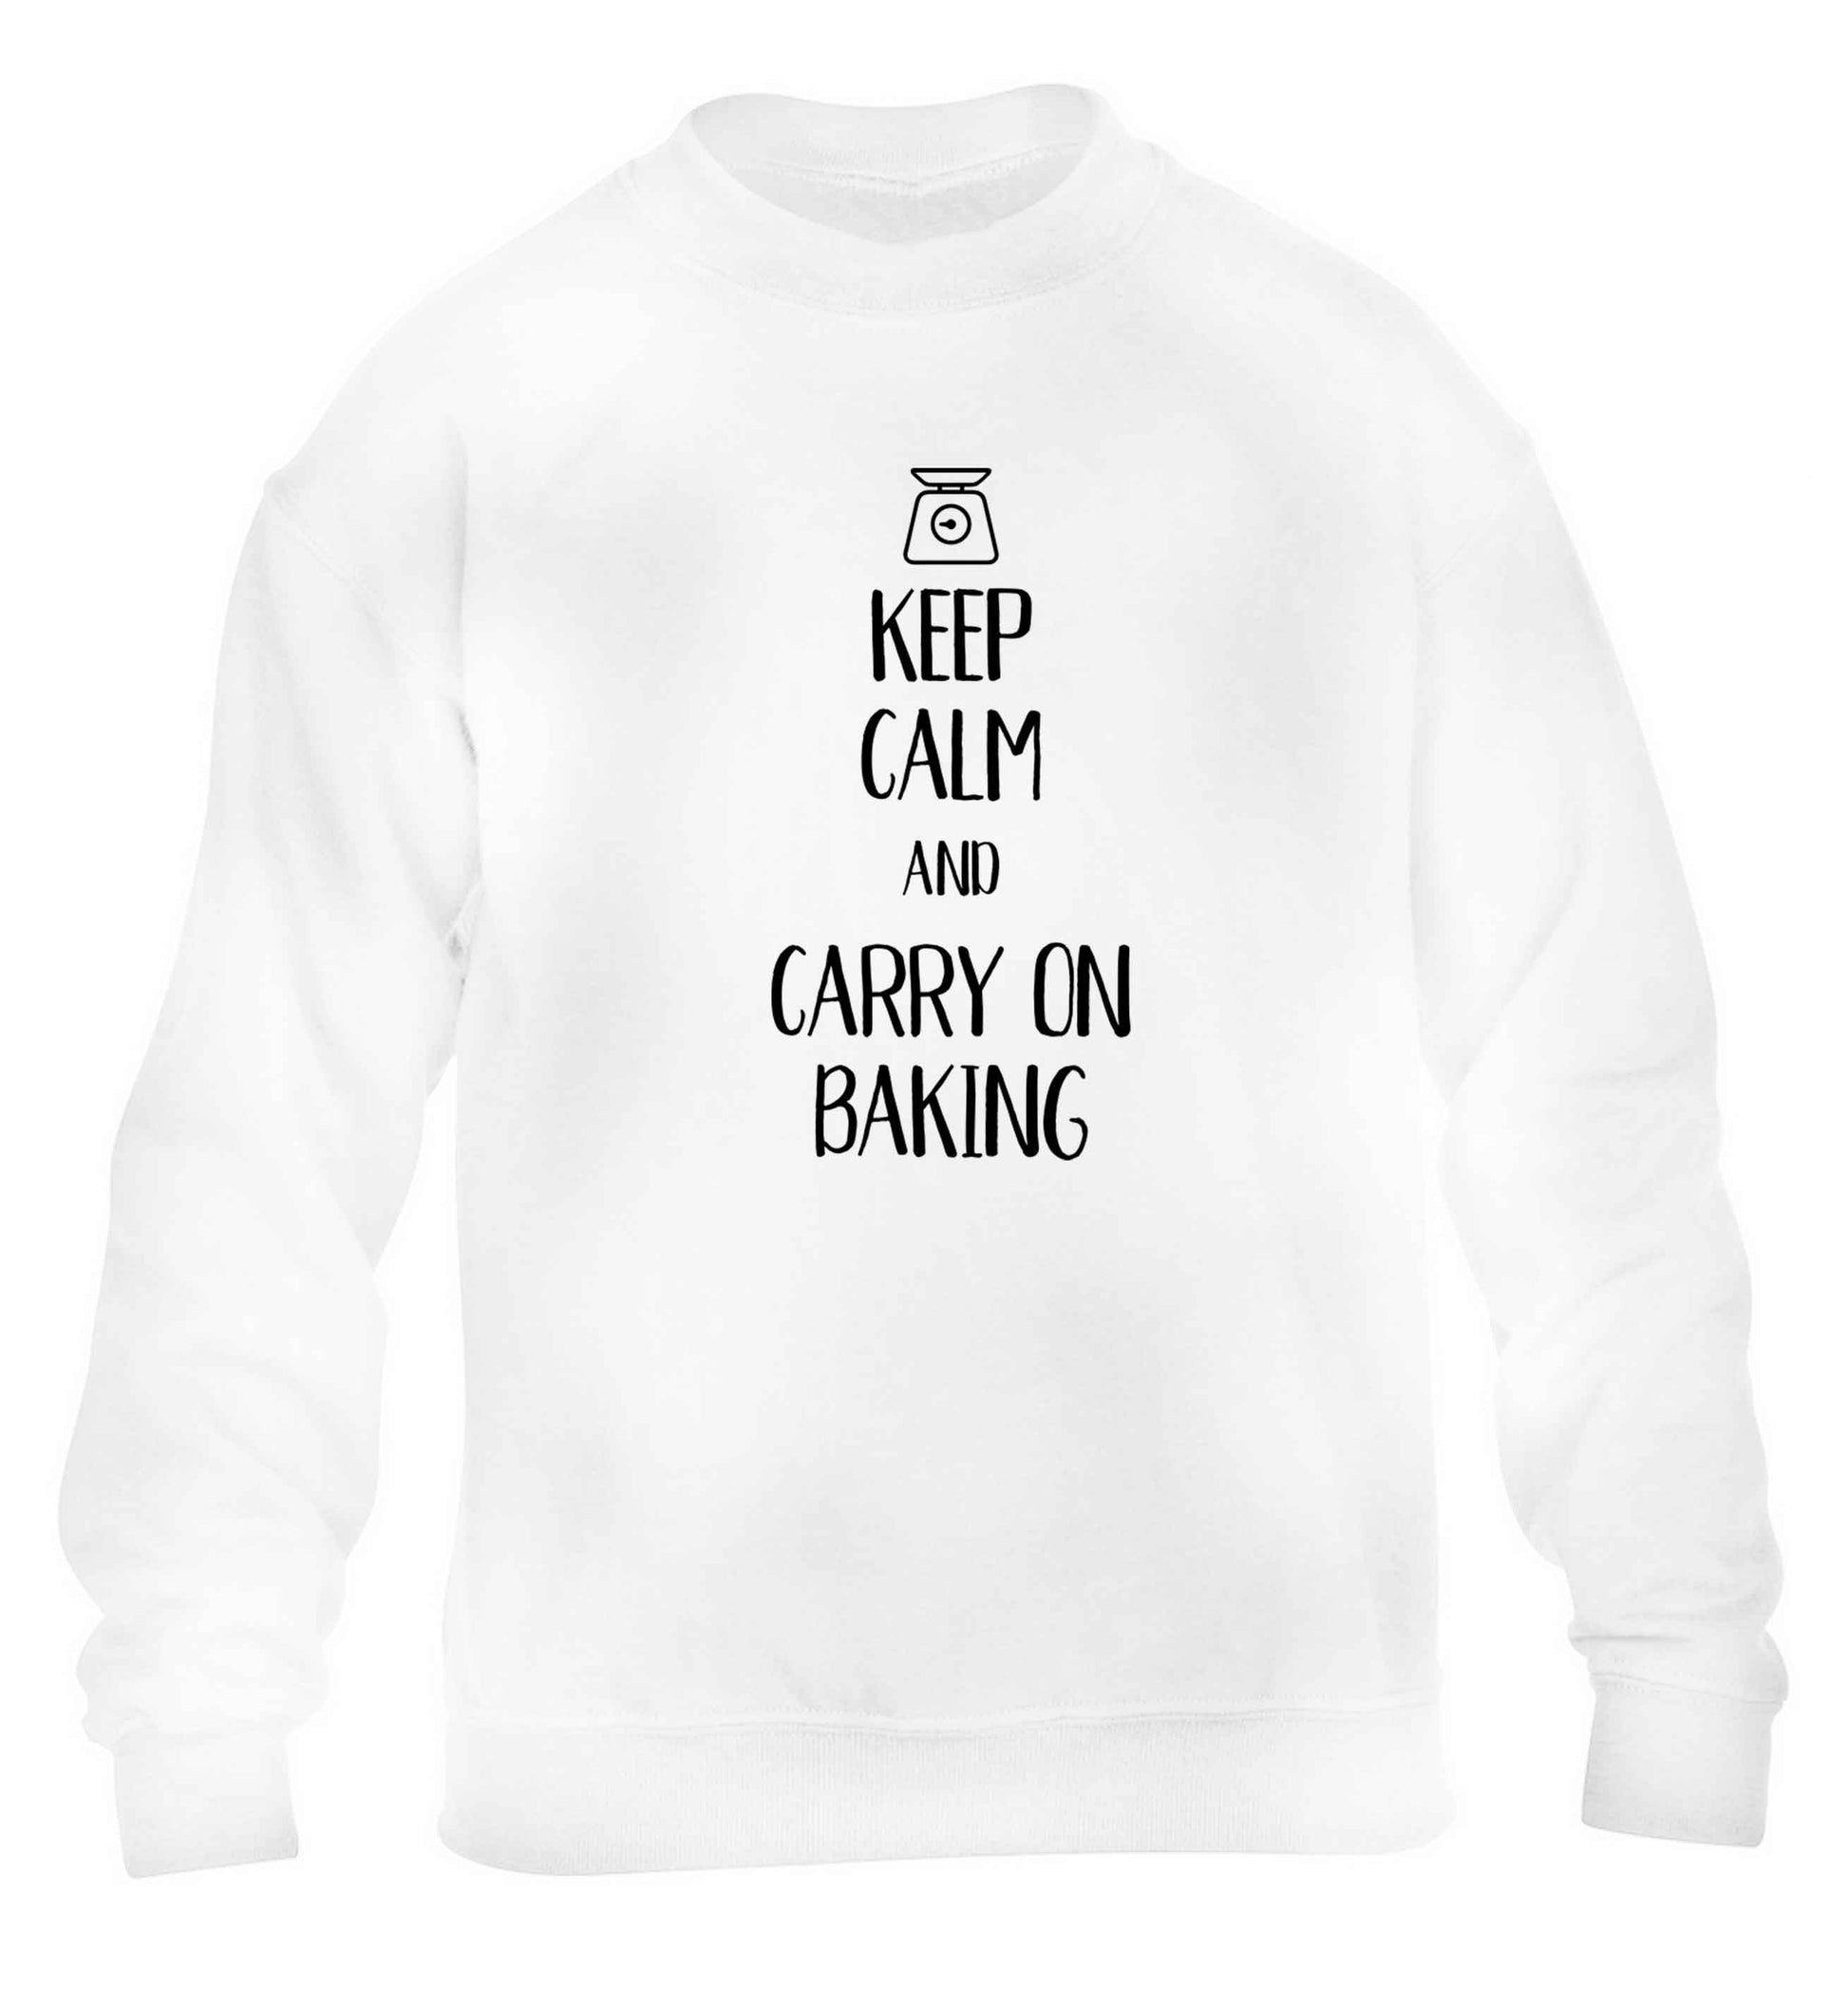 Keep calm and carry on baking children's white sweater 12-13 Years